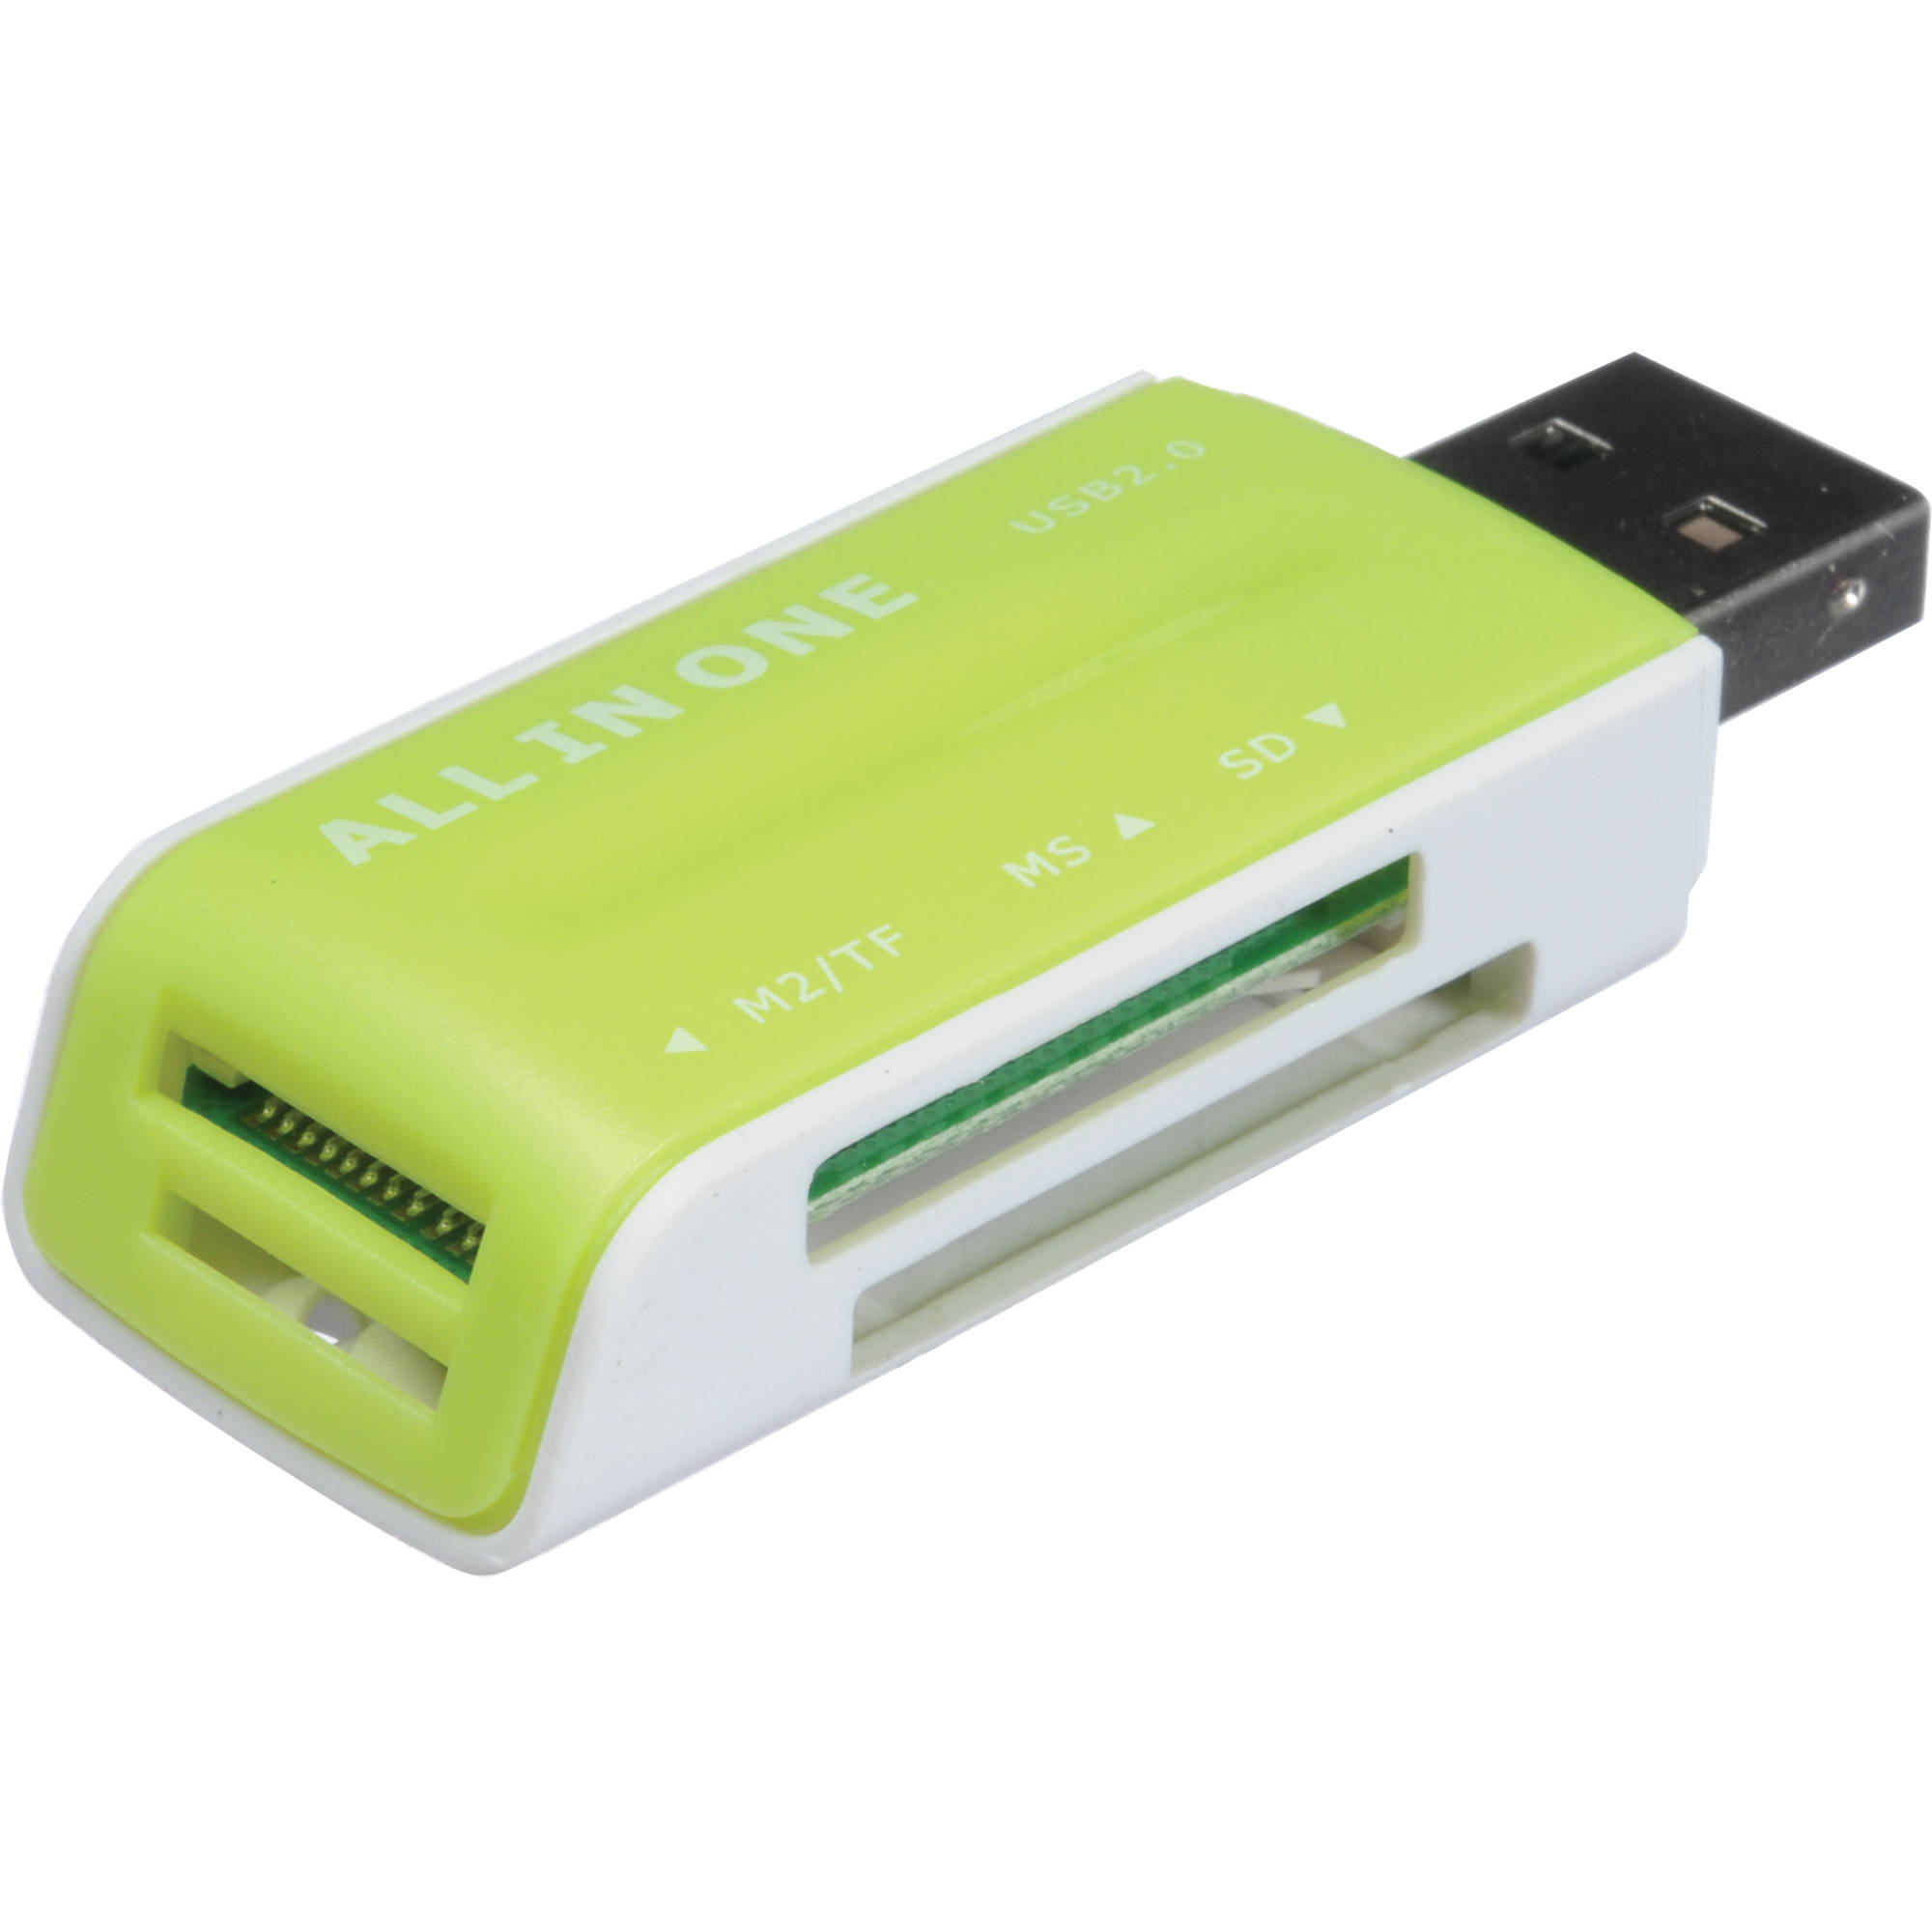 usb2.0 all in one card reader driver